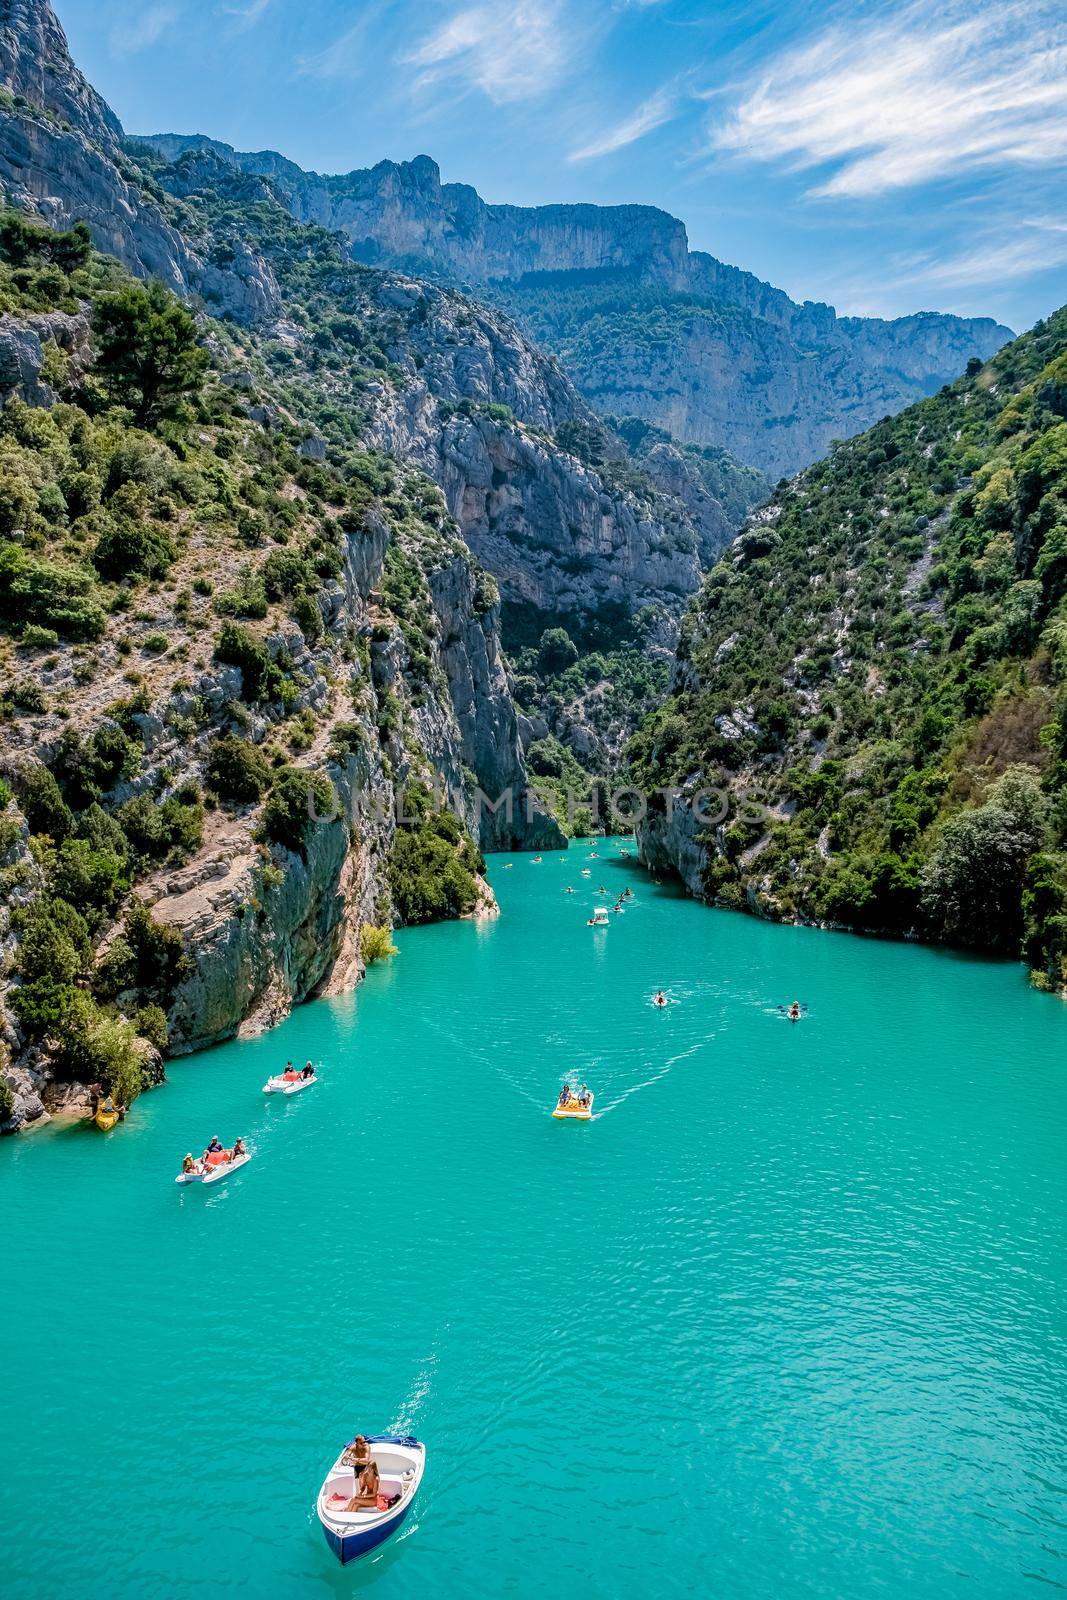 cliffy rocks of Verdon Gorge at lake of Sainte Croix, Provence, France, Provence Alpes Cote d Azur, blue green lake with boats in France Provence. Europe June 2020